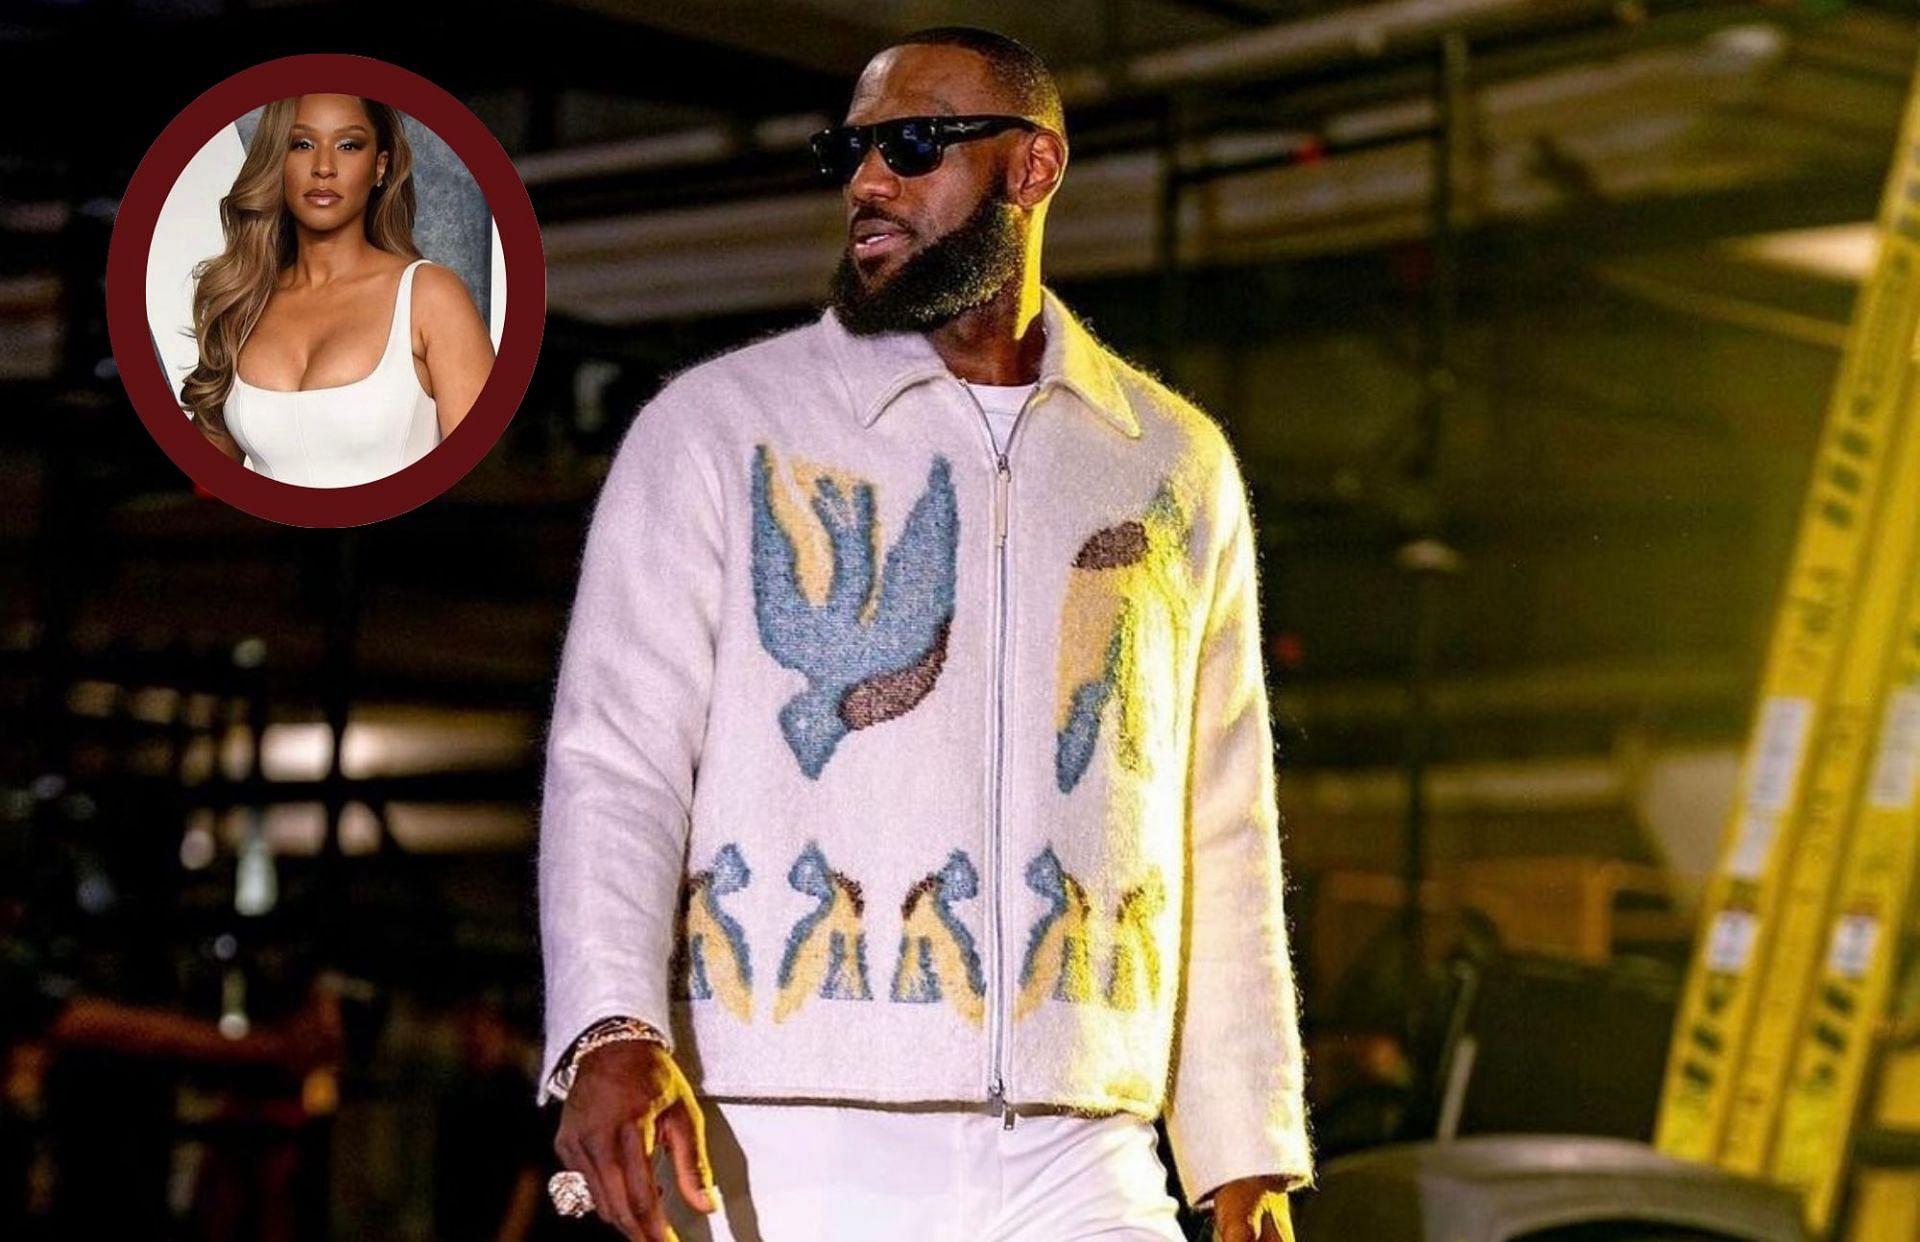 LeBron James had jokes for his wife Savannah James in a sneak-peak into his podcast